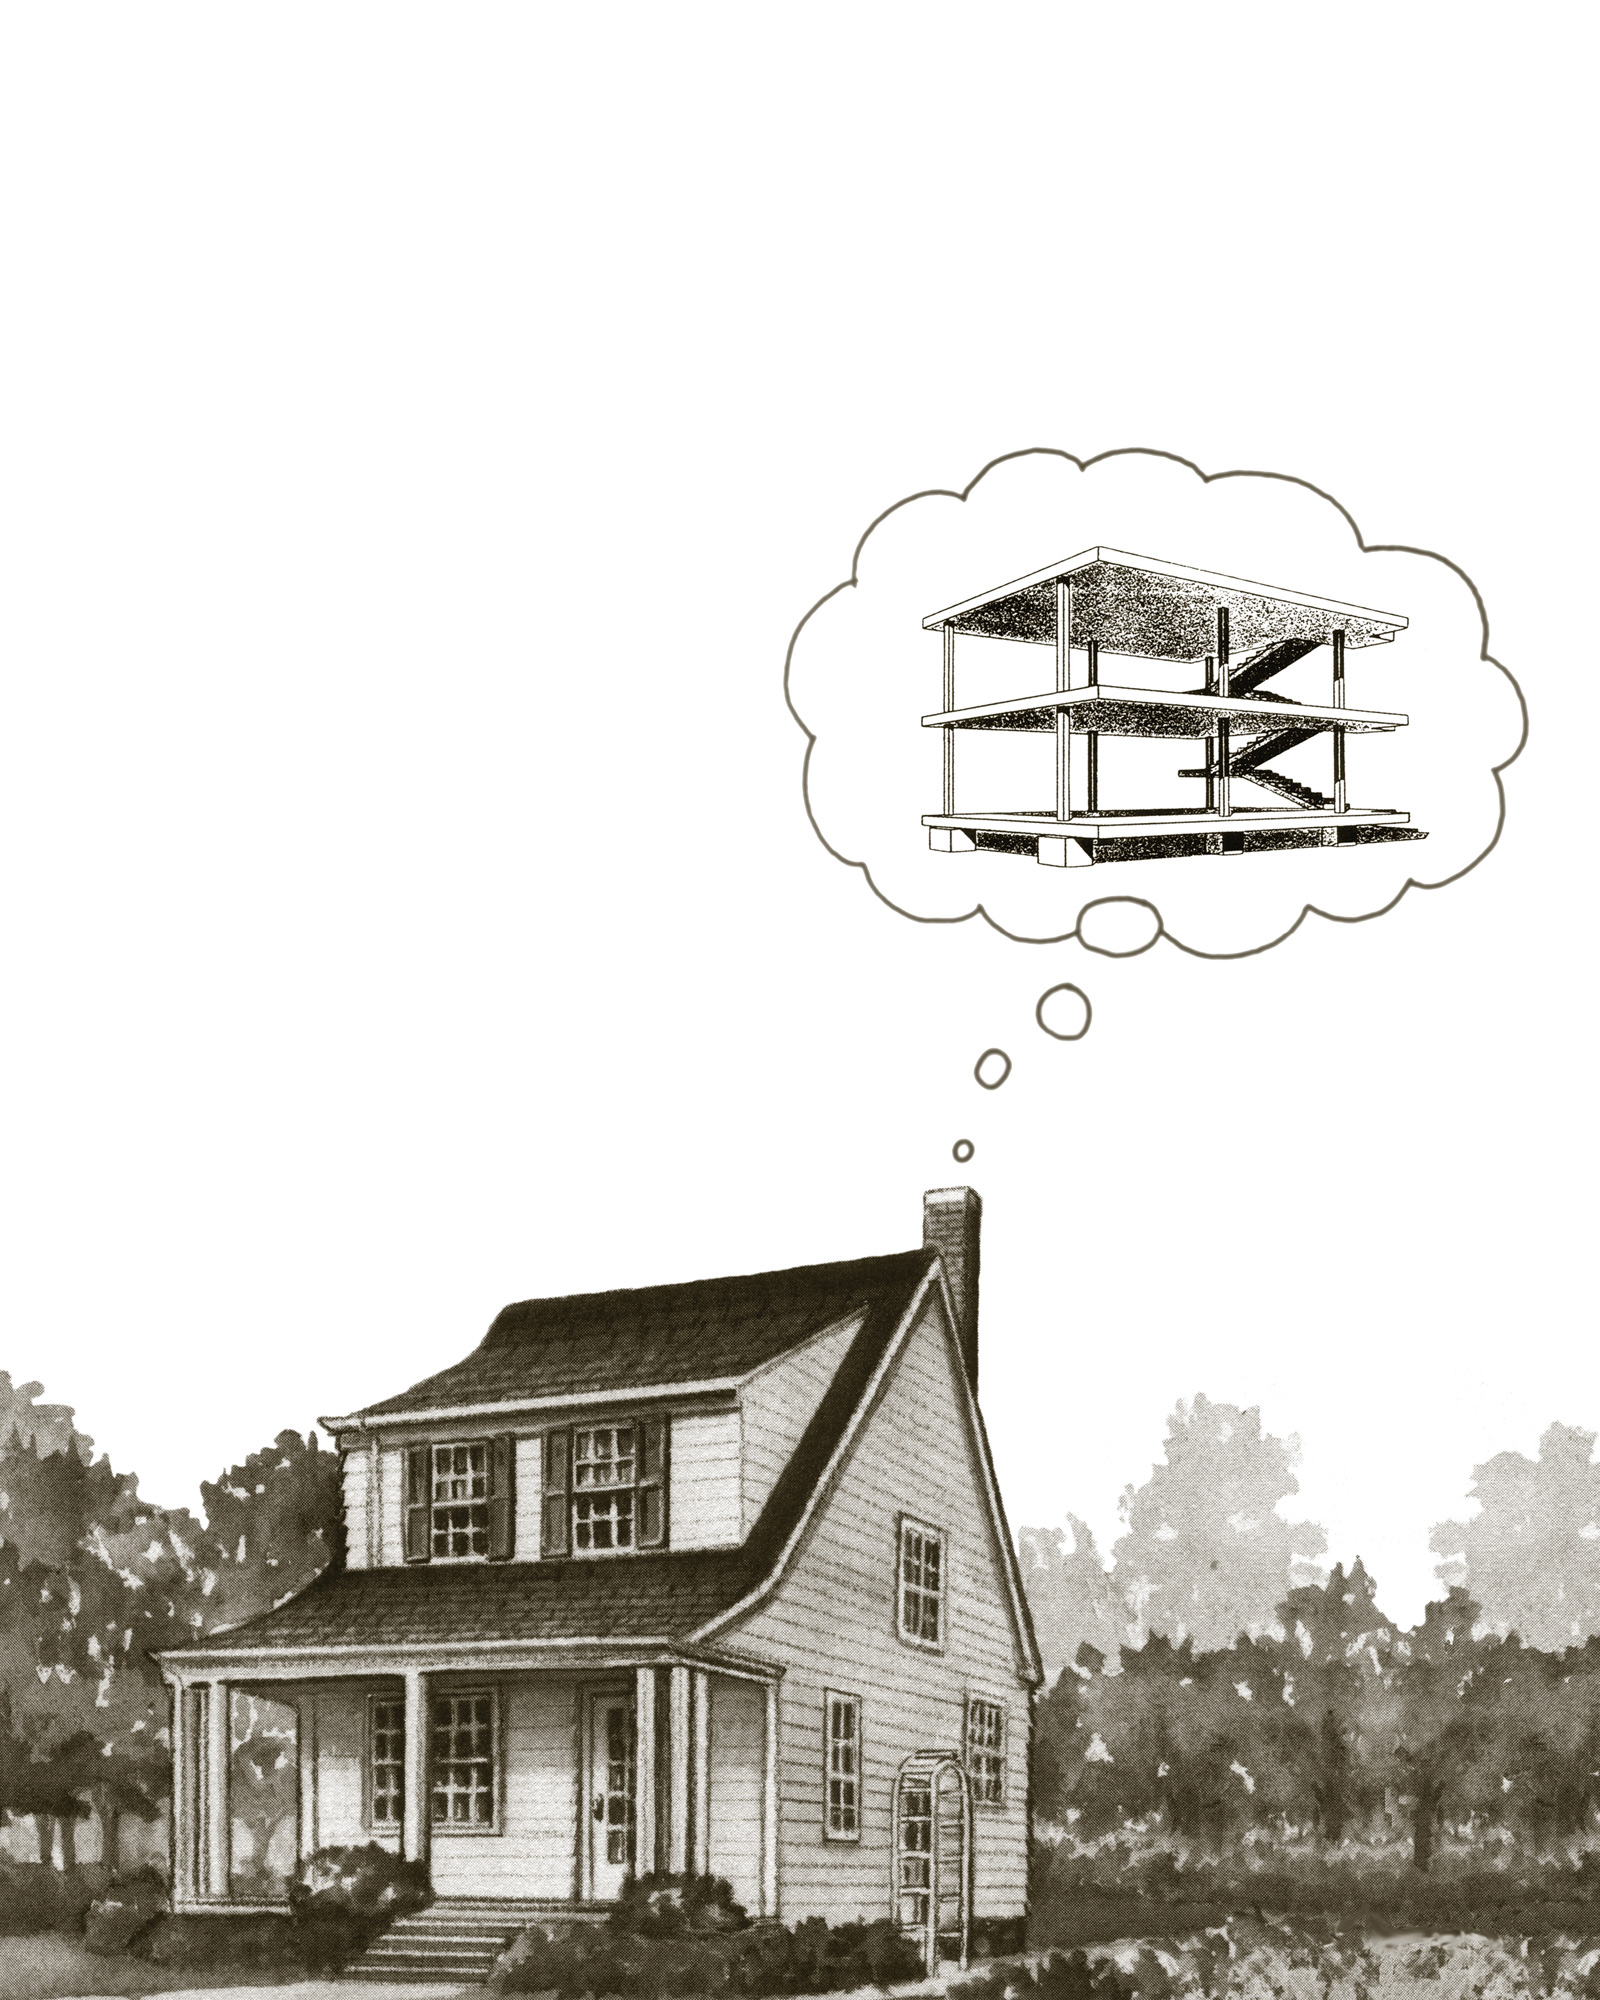 A two thousand two illustration by Peter Dudek titled “House Dreaming Domino,” of a house with a thought bubble containing an internal structure of a house.